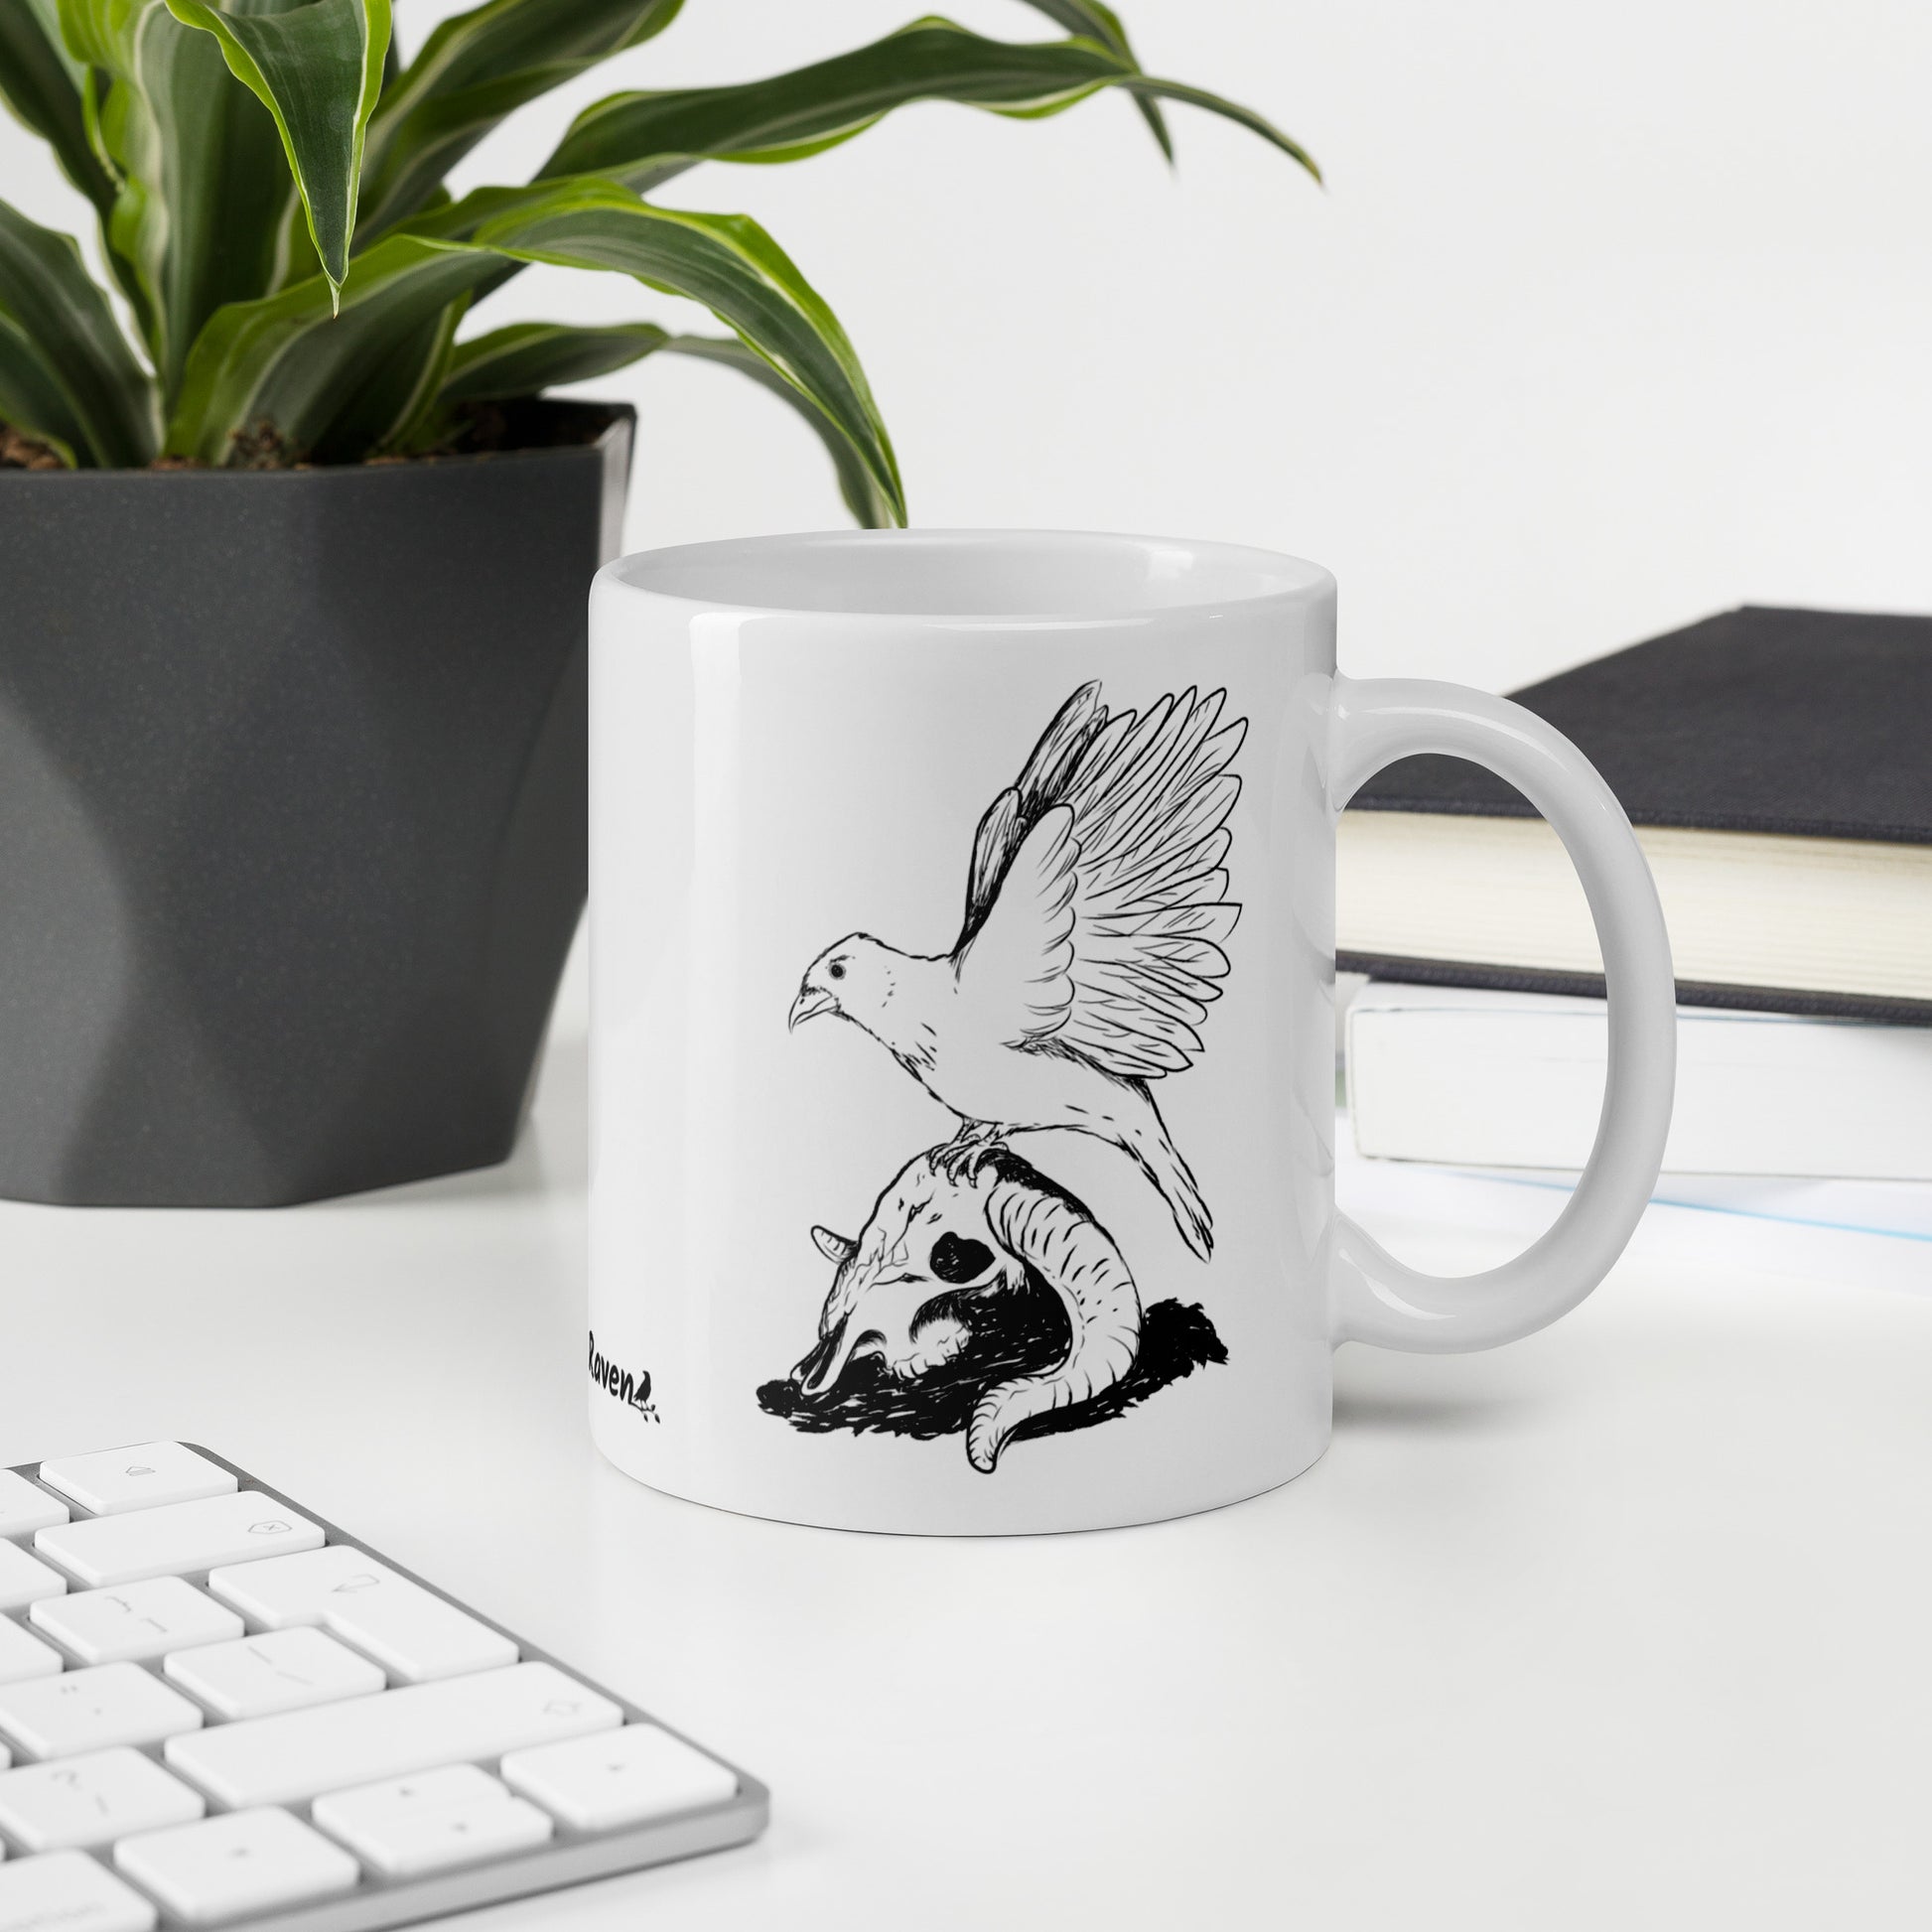 11 ounce white glossy mug featuring double sided print of Reflections, a design with a crow with wings outstretched on a sheep skull. Shown on desktop by plant and keyboard.